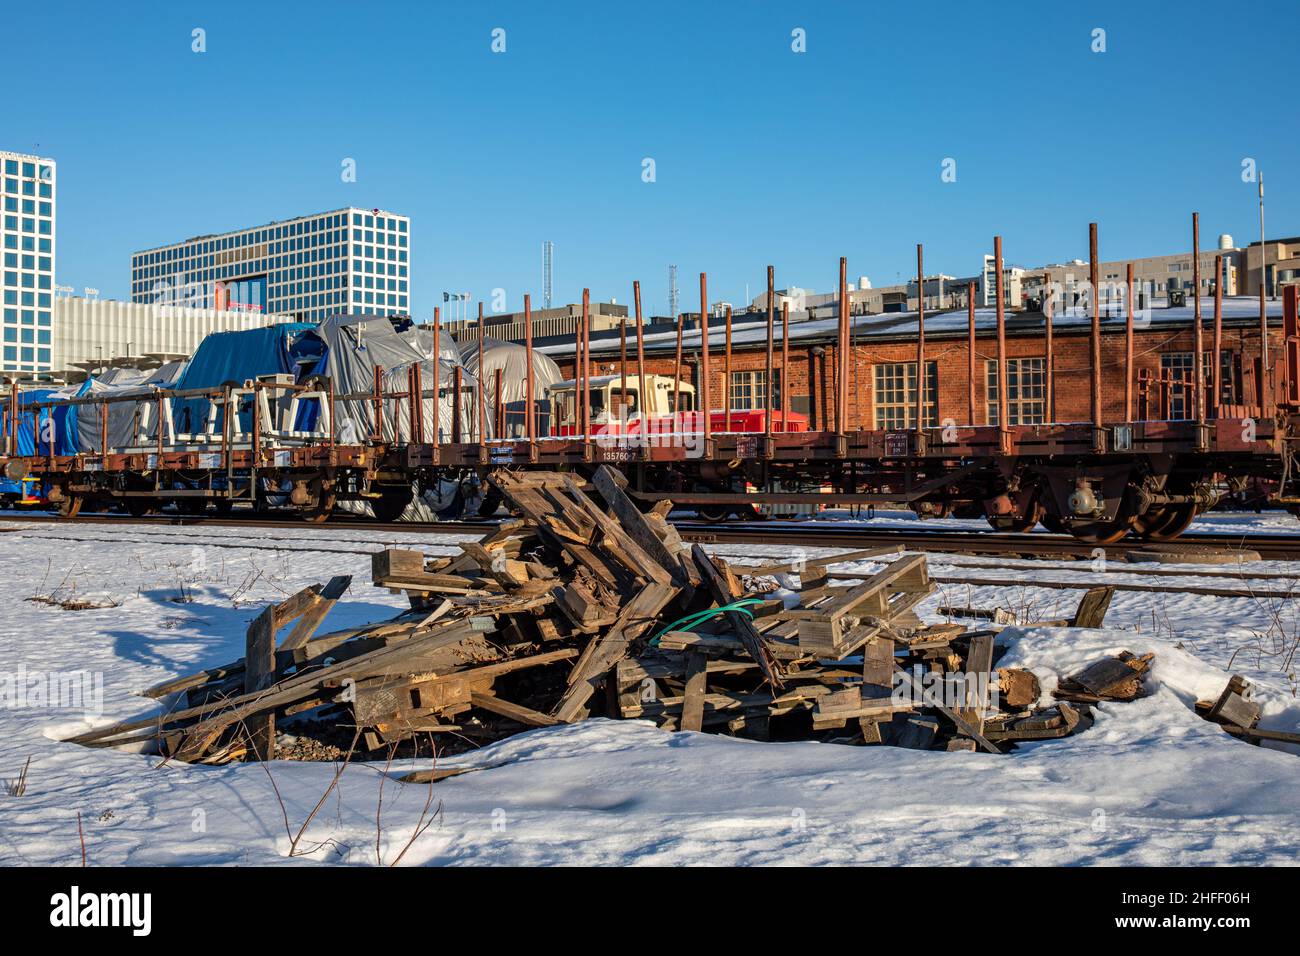 Pile of broken pallets in the snow at old rail yard in Pasila district of Helsinki, Finland Stock Photo